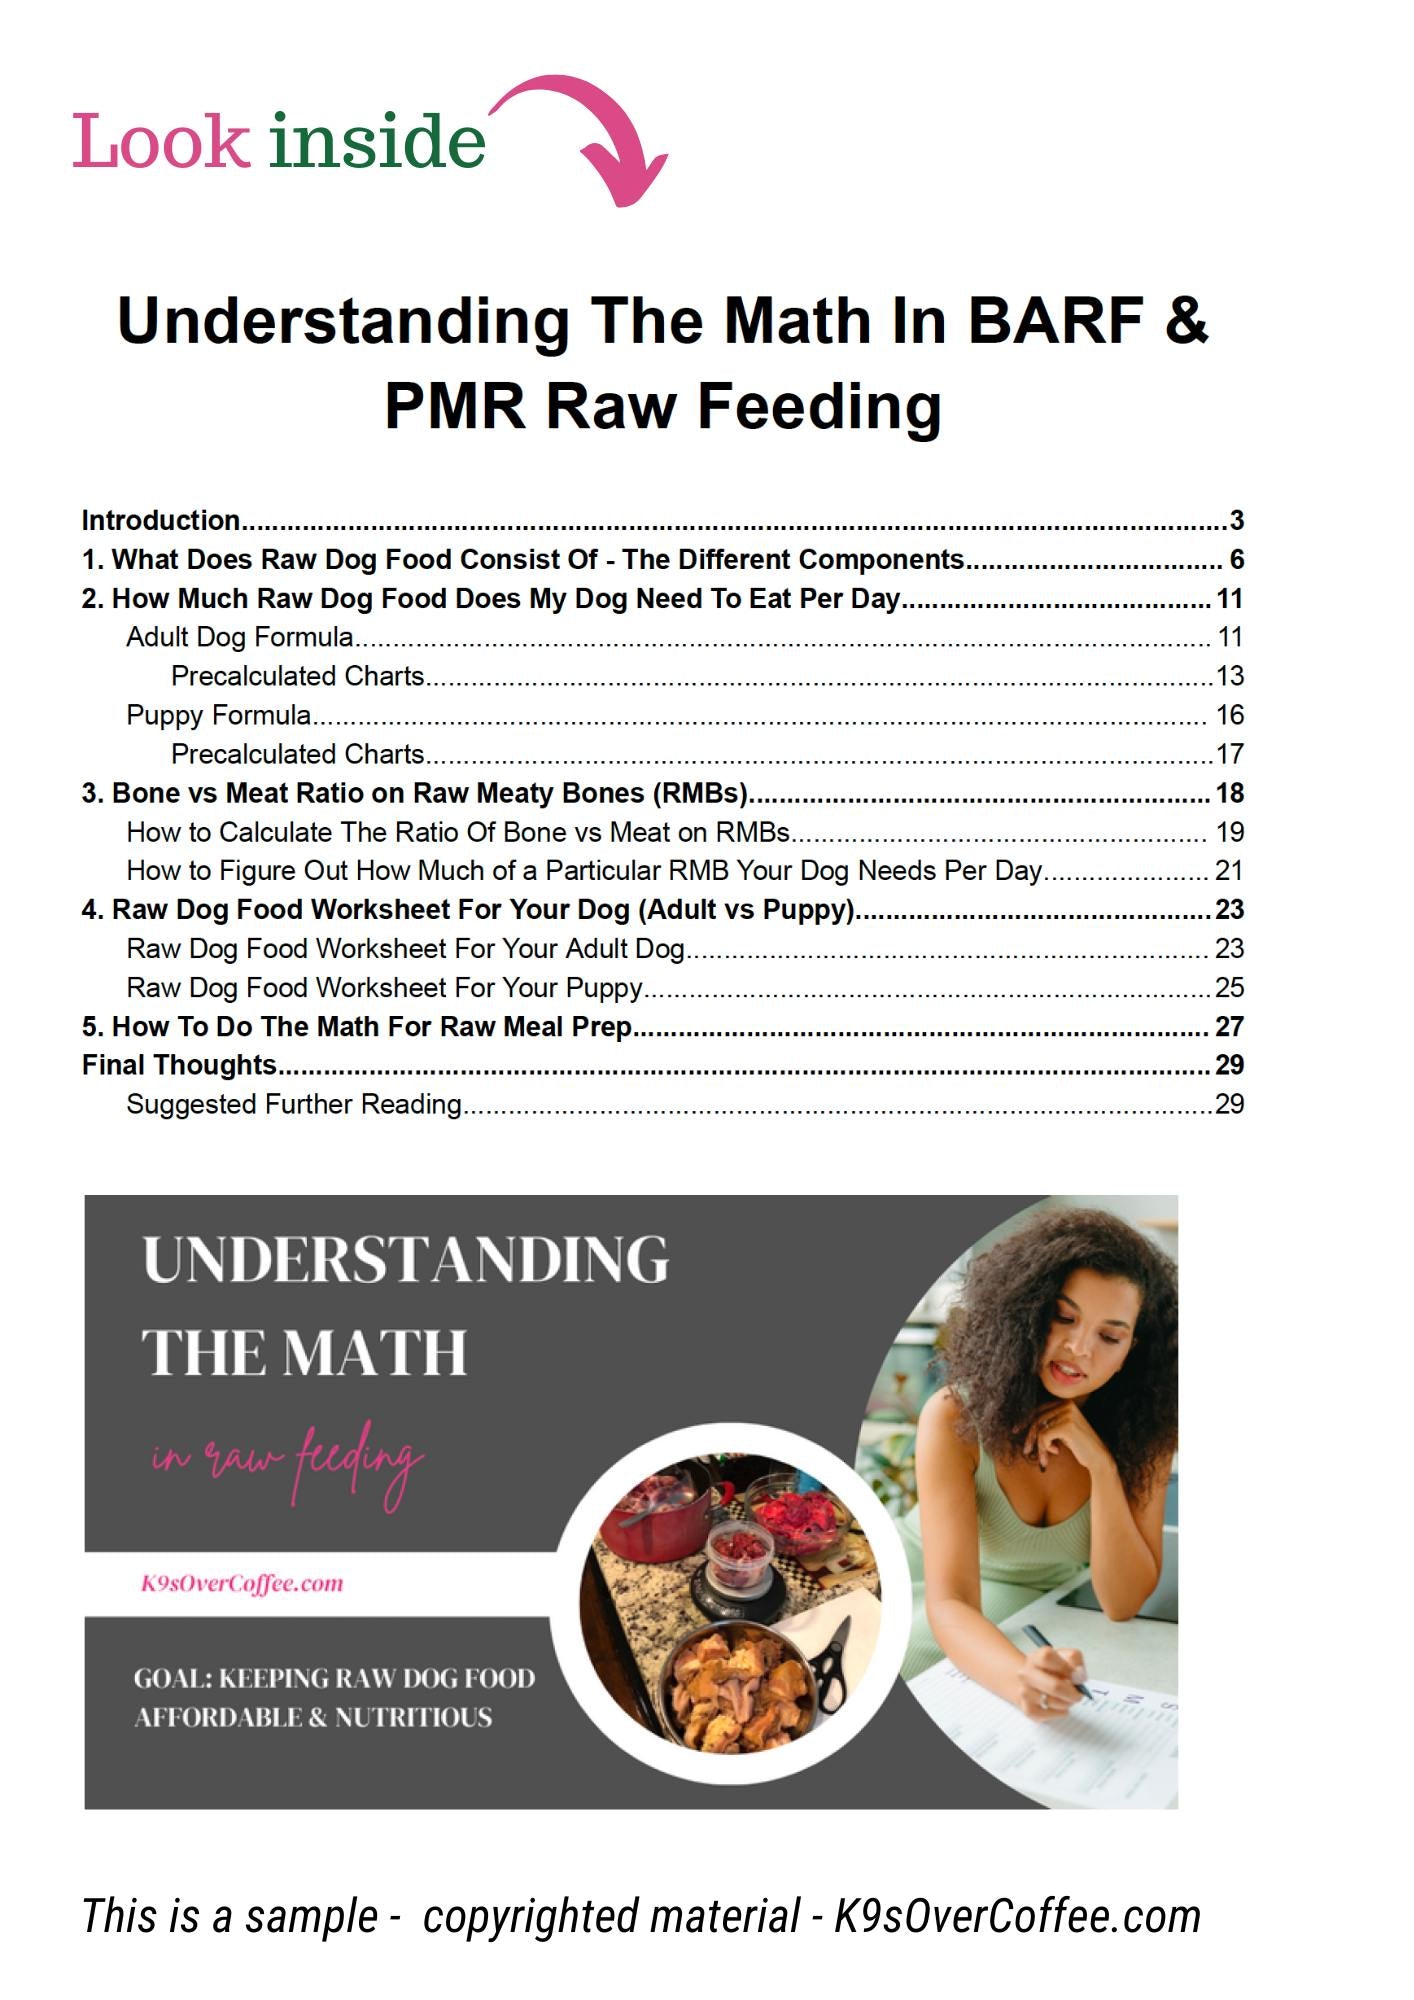 Understanding The Math In BARF & PMR - Raw Feeding Charts for Dogs